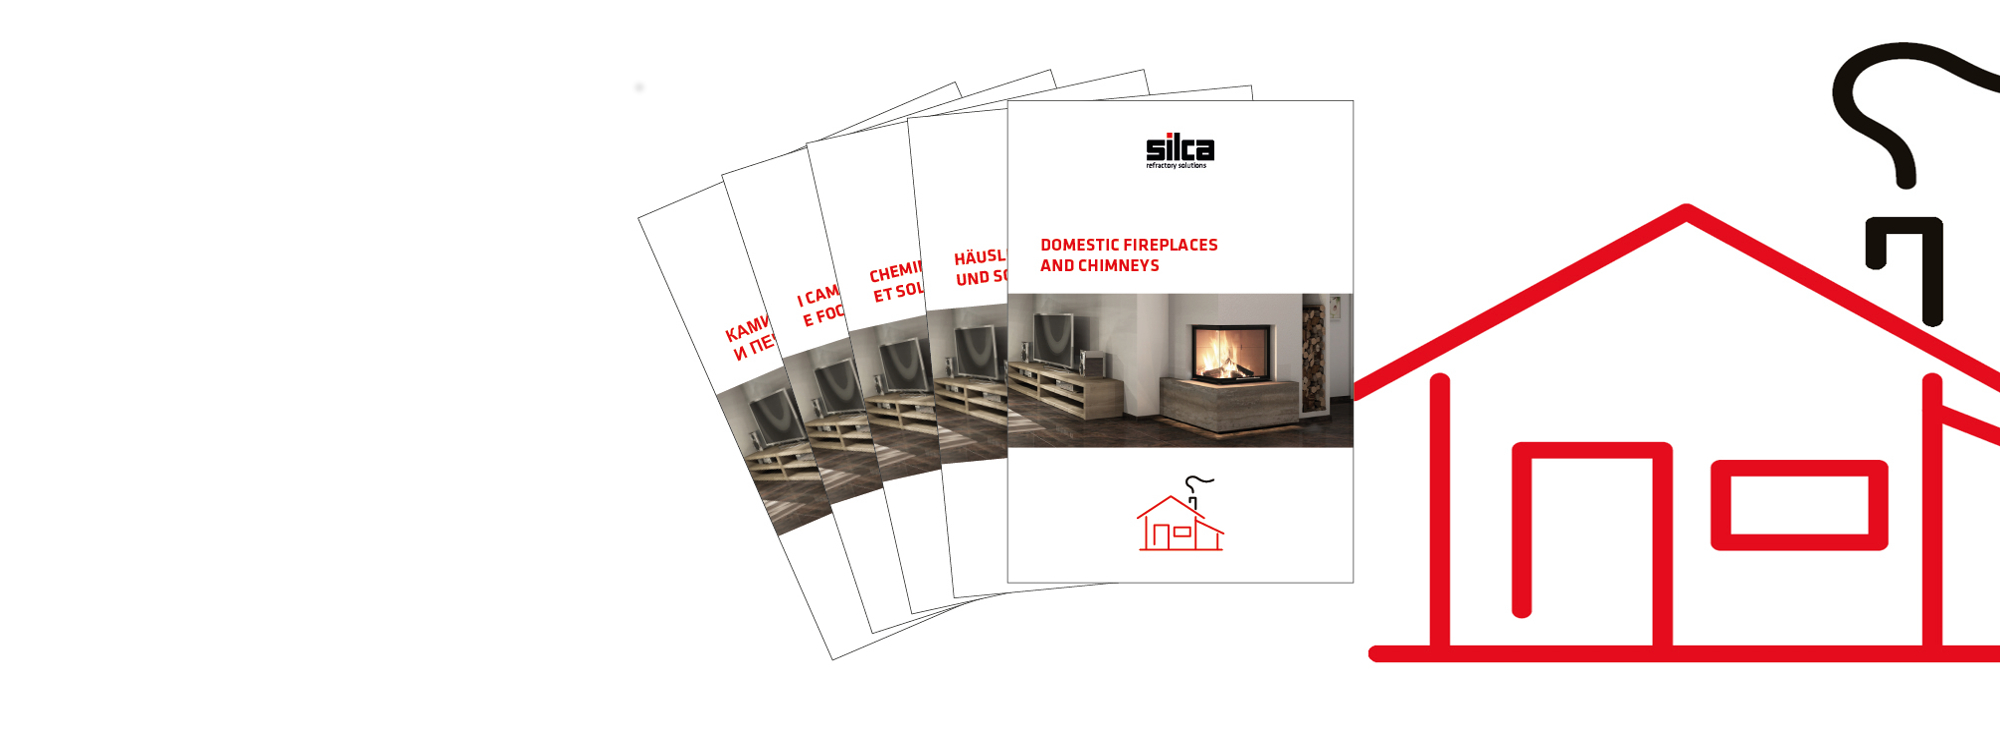 SILCA - Domestic fireplaces and chimneys